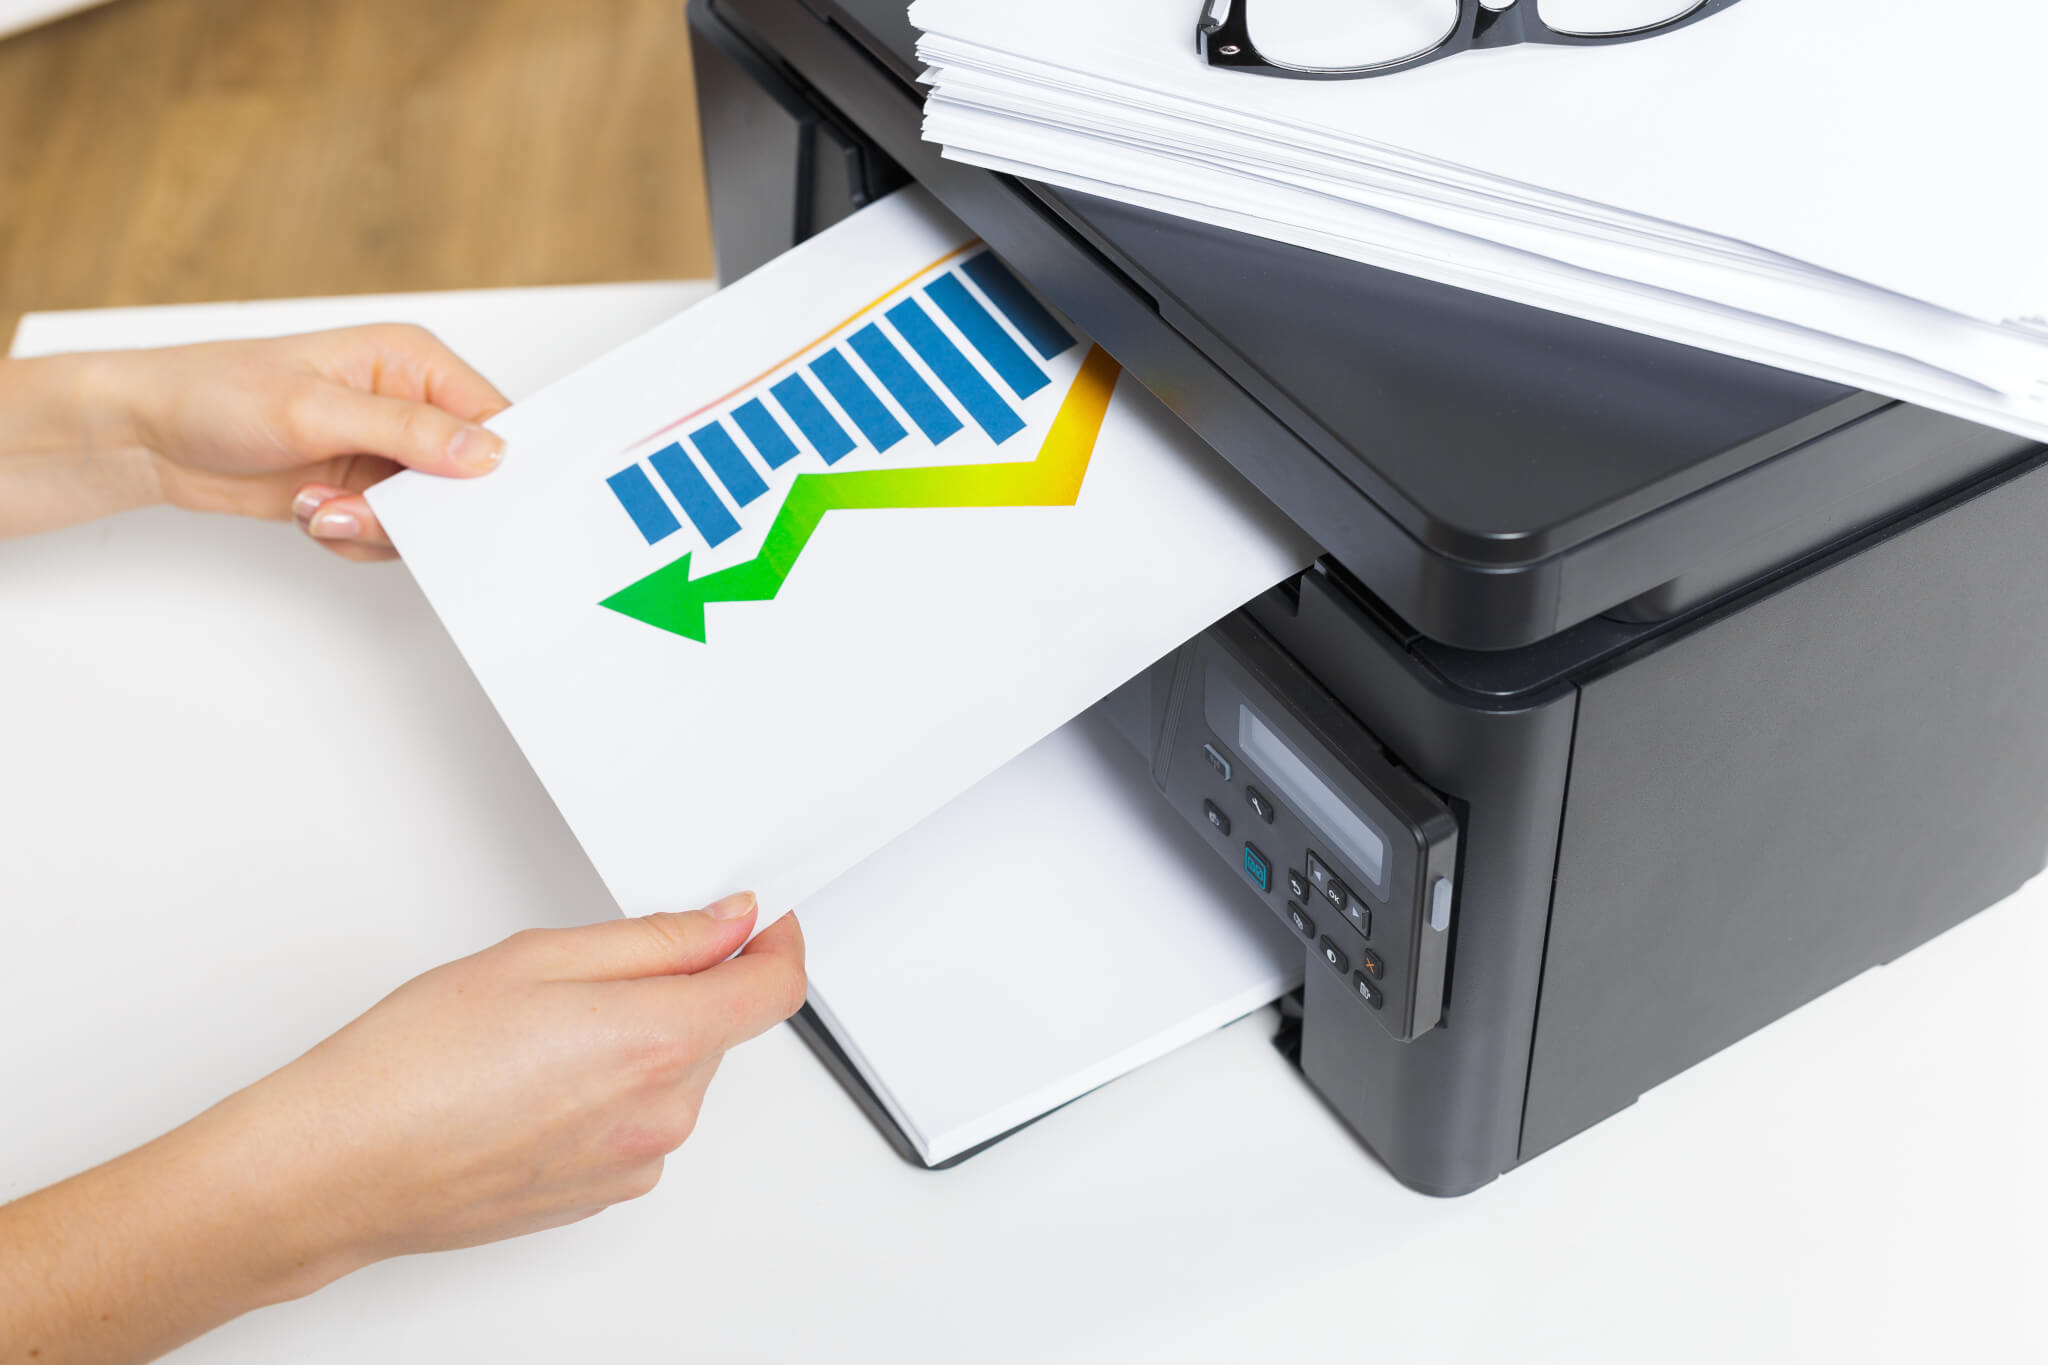 Født opskrift bord Your office laser printer may pose a serious threat to your health, study  warns - Study Finds